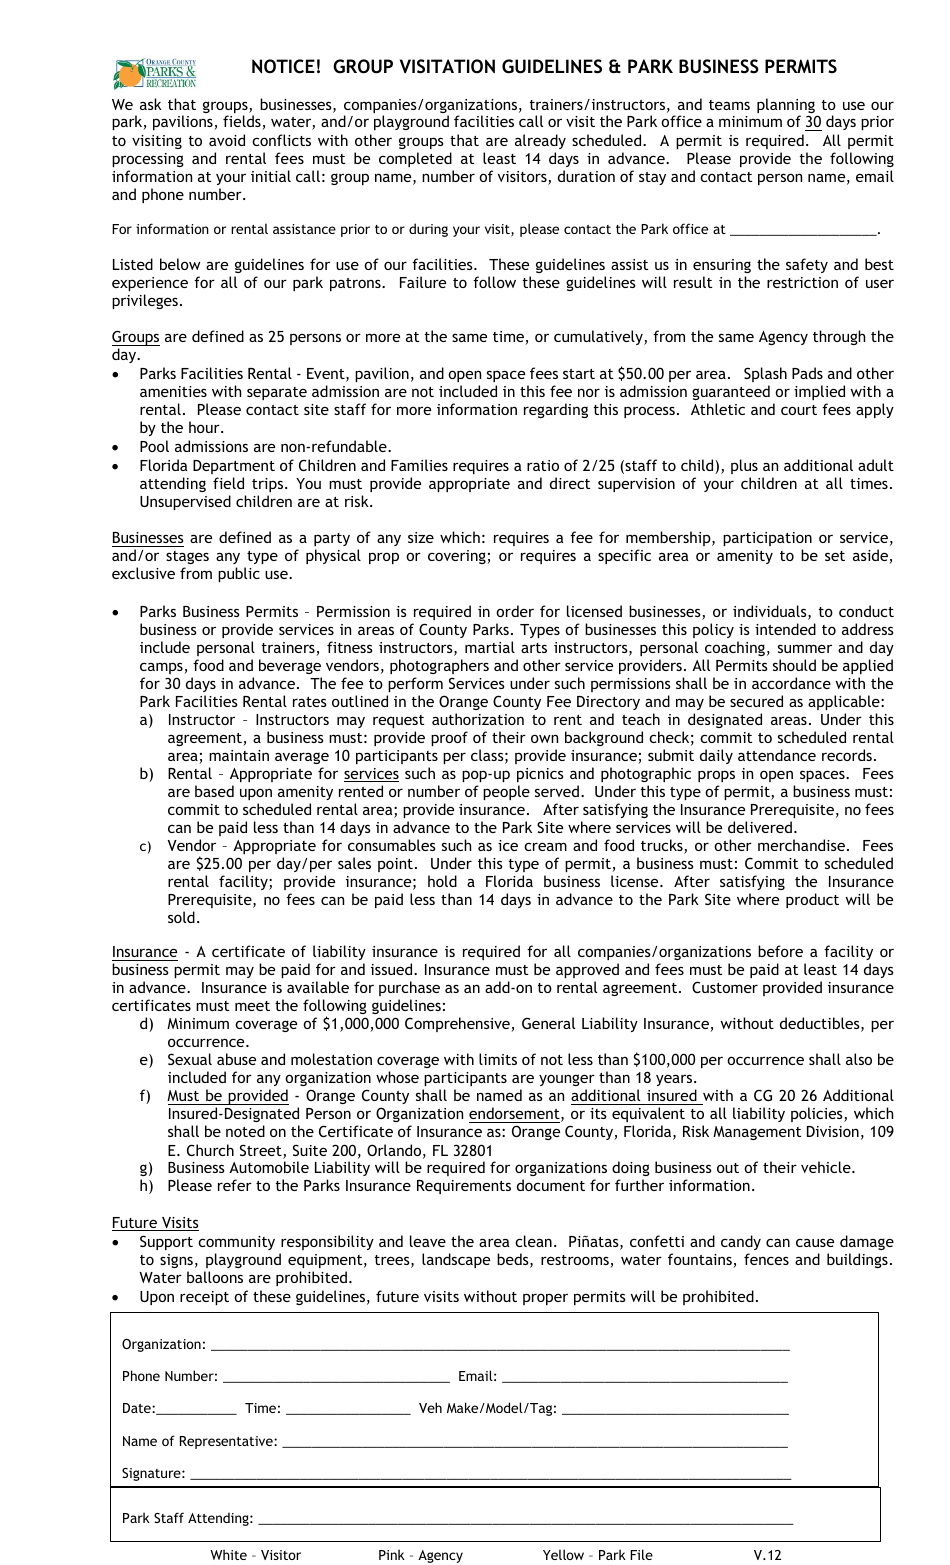 Group Visitation Guidelines  Park Business Permits - Orange County, Florida, Page 1